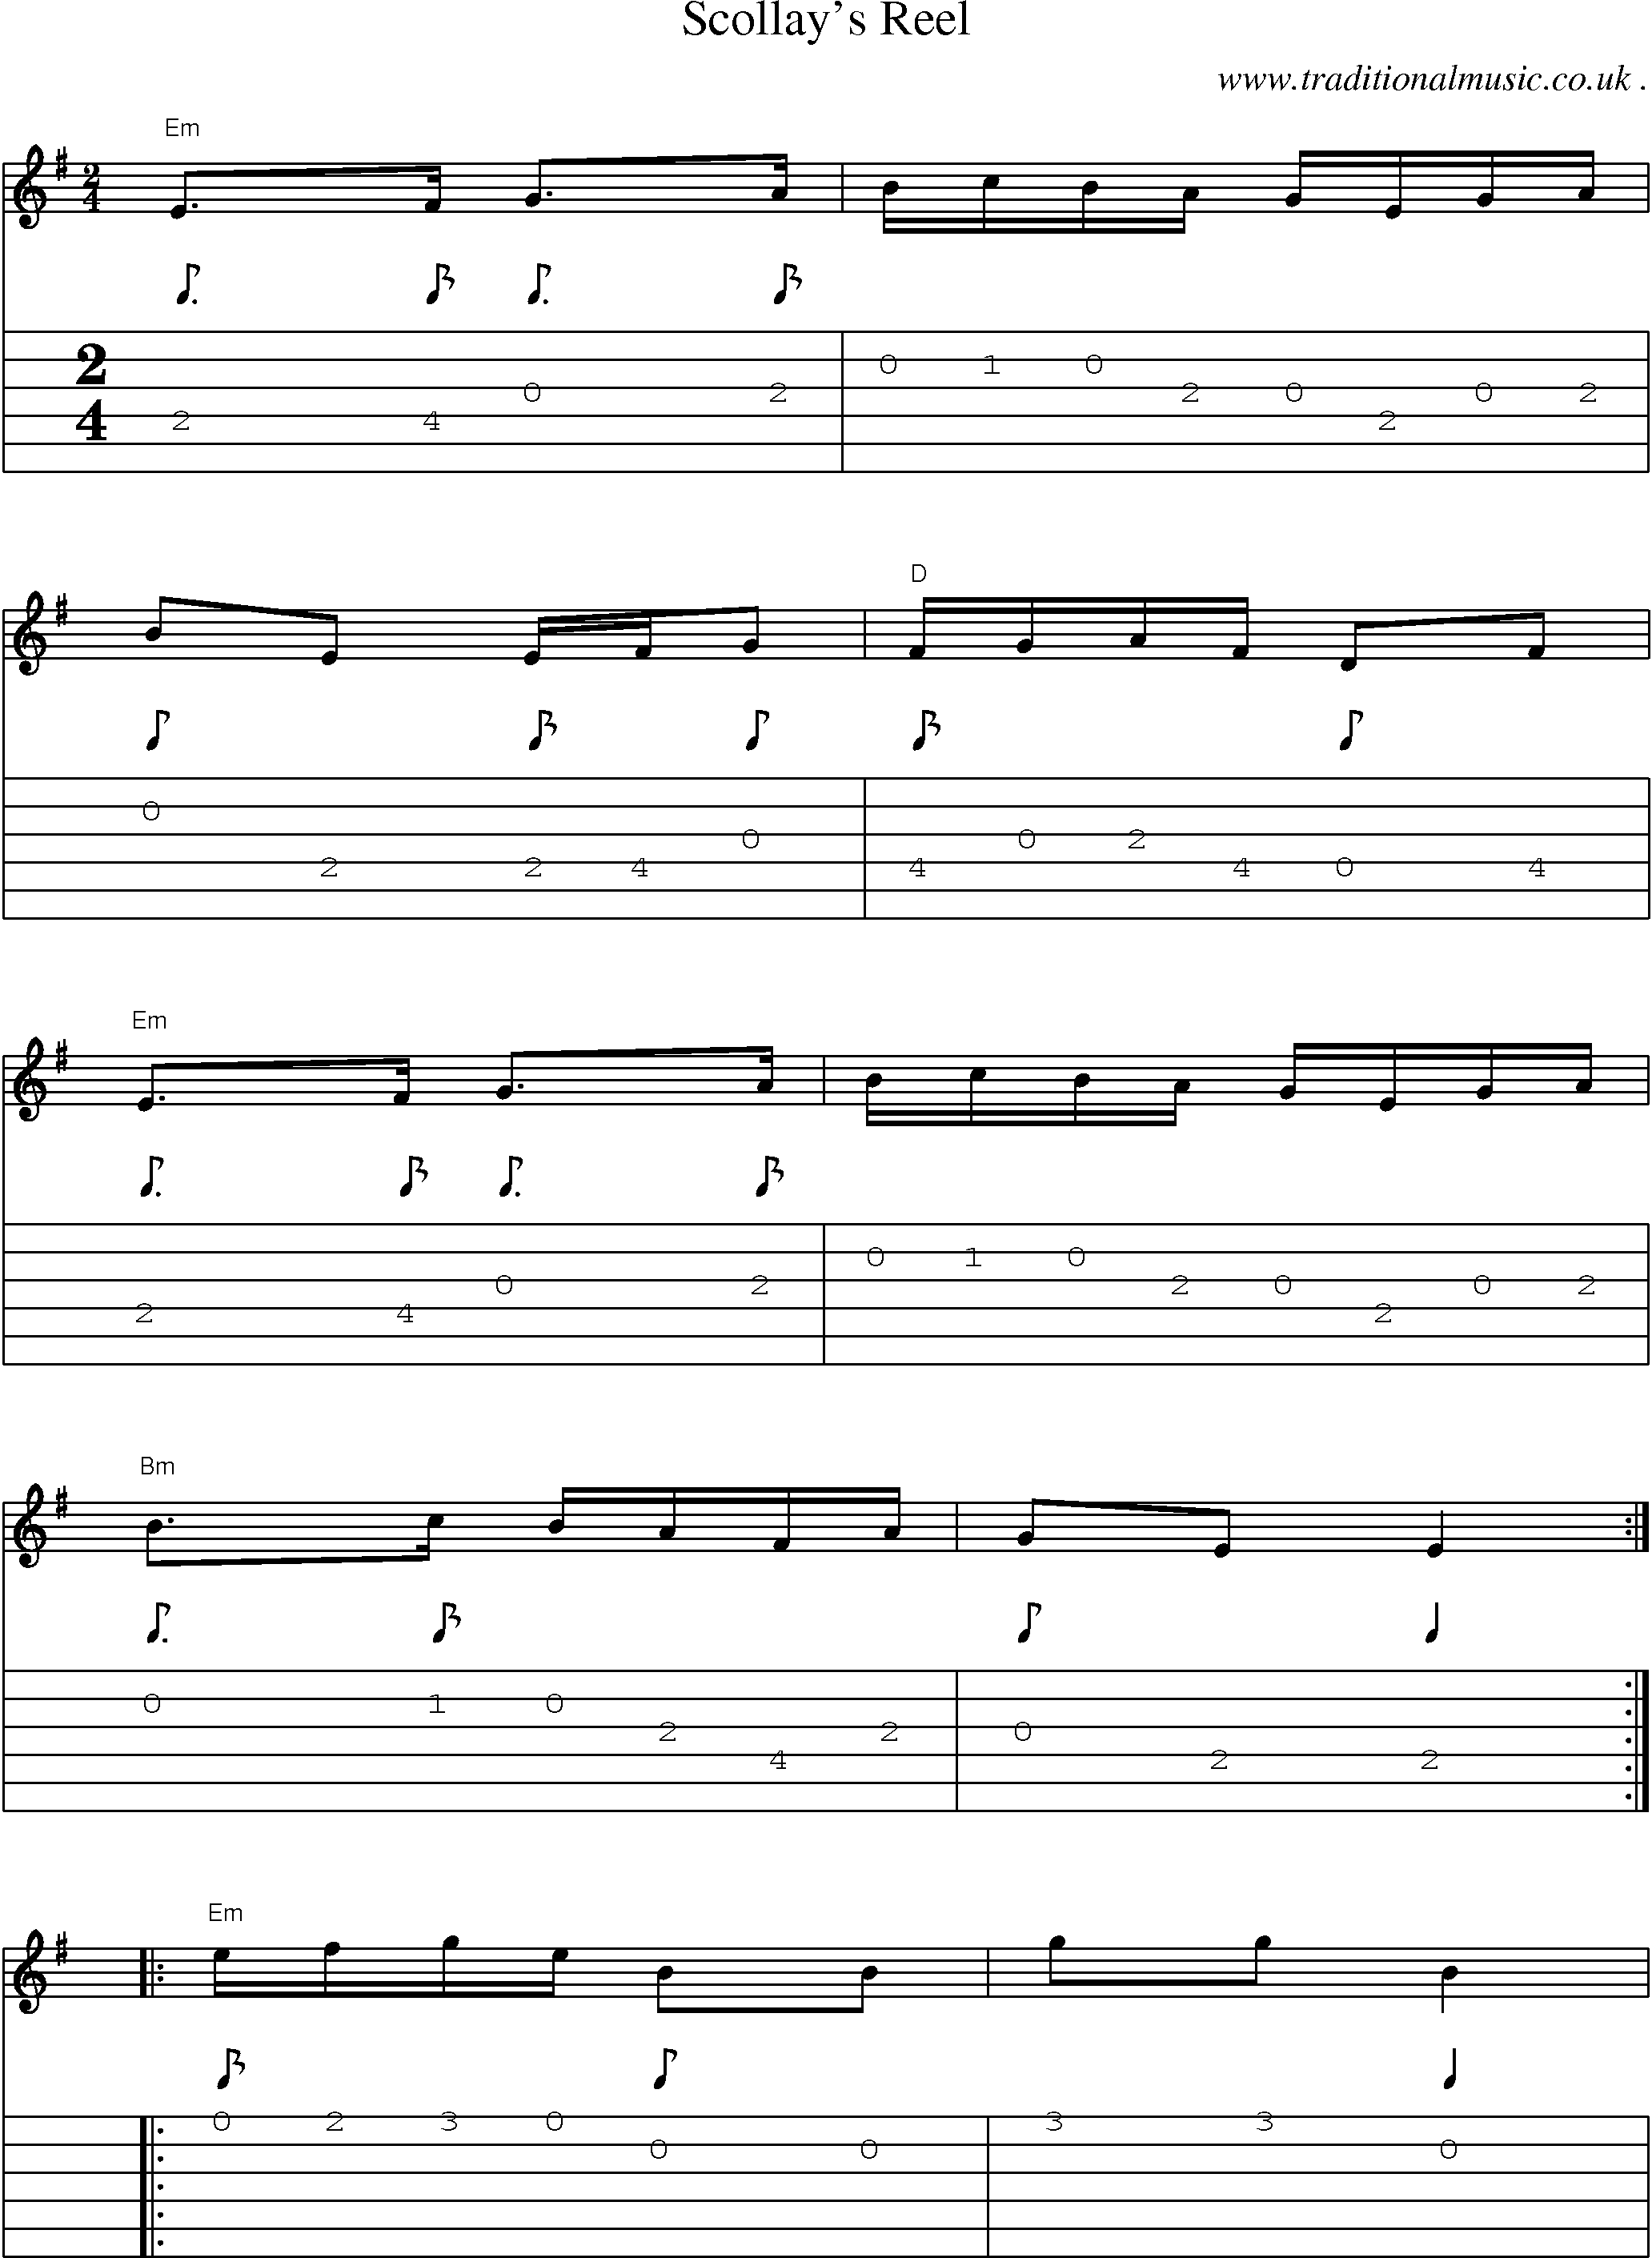 Music Score and Guitar Tabs for Scollays Reel